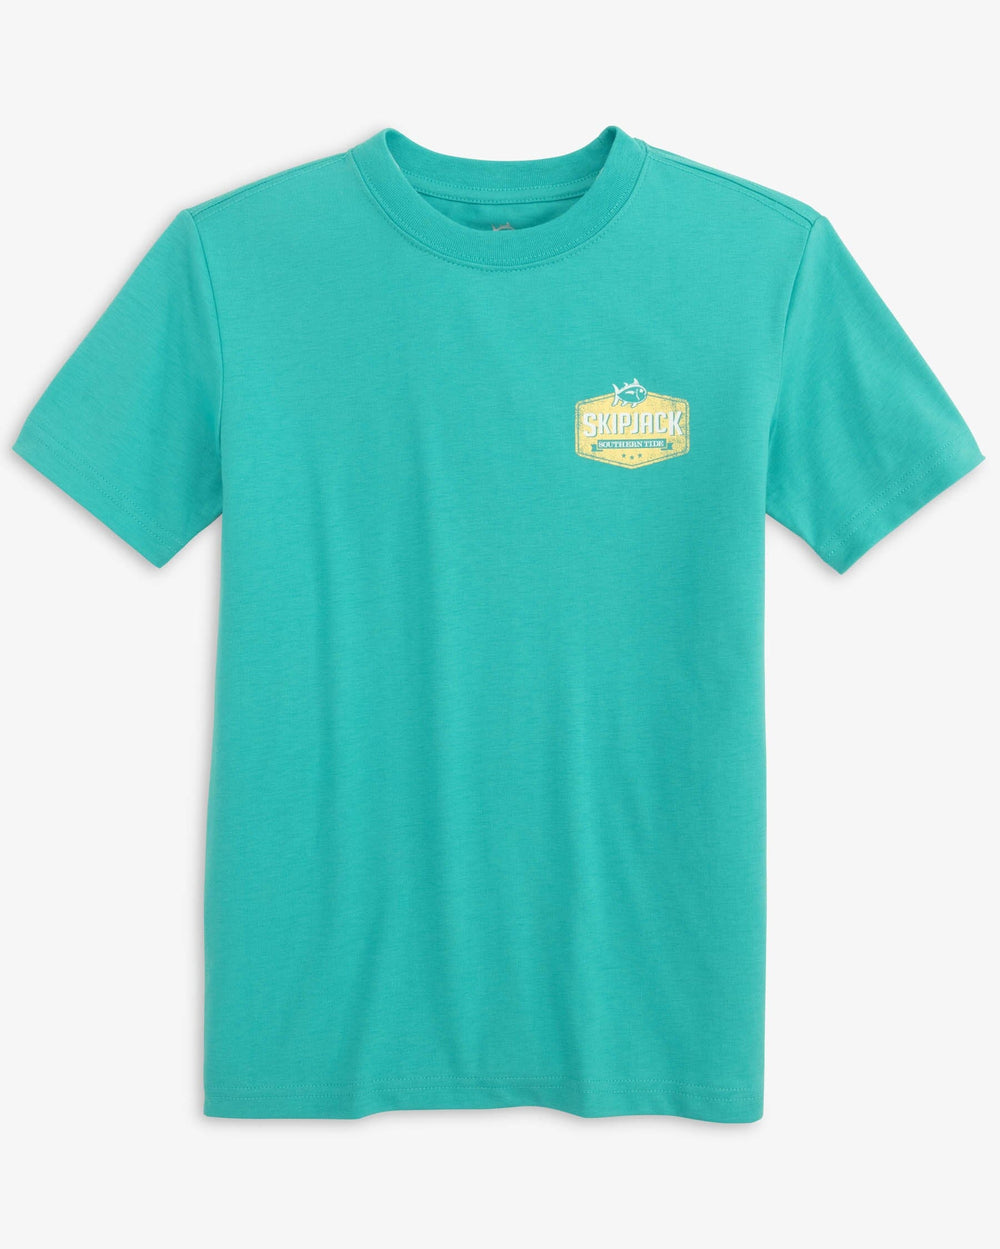 The front view of the Southern Tide Youth Weathered Badge T-Shirt by Southern Tide - Tidal Wave